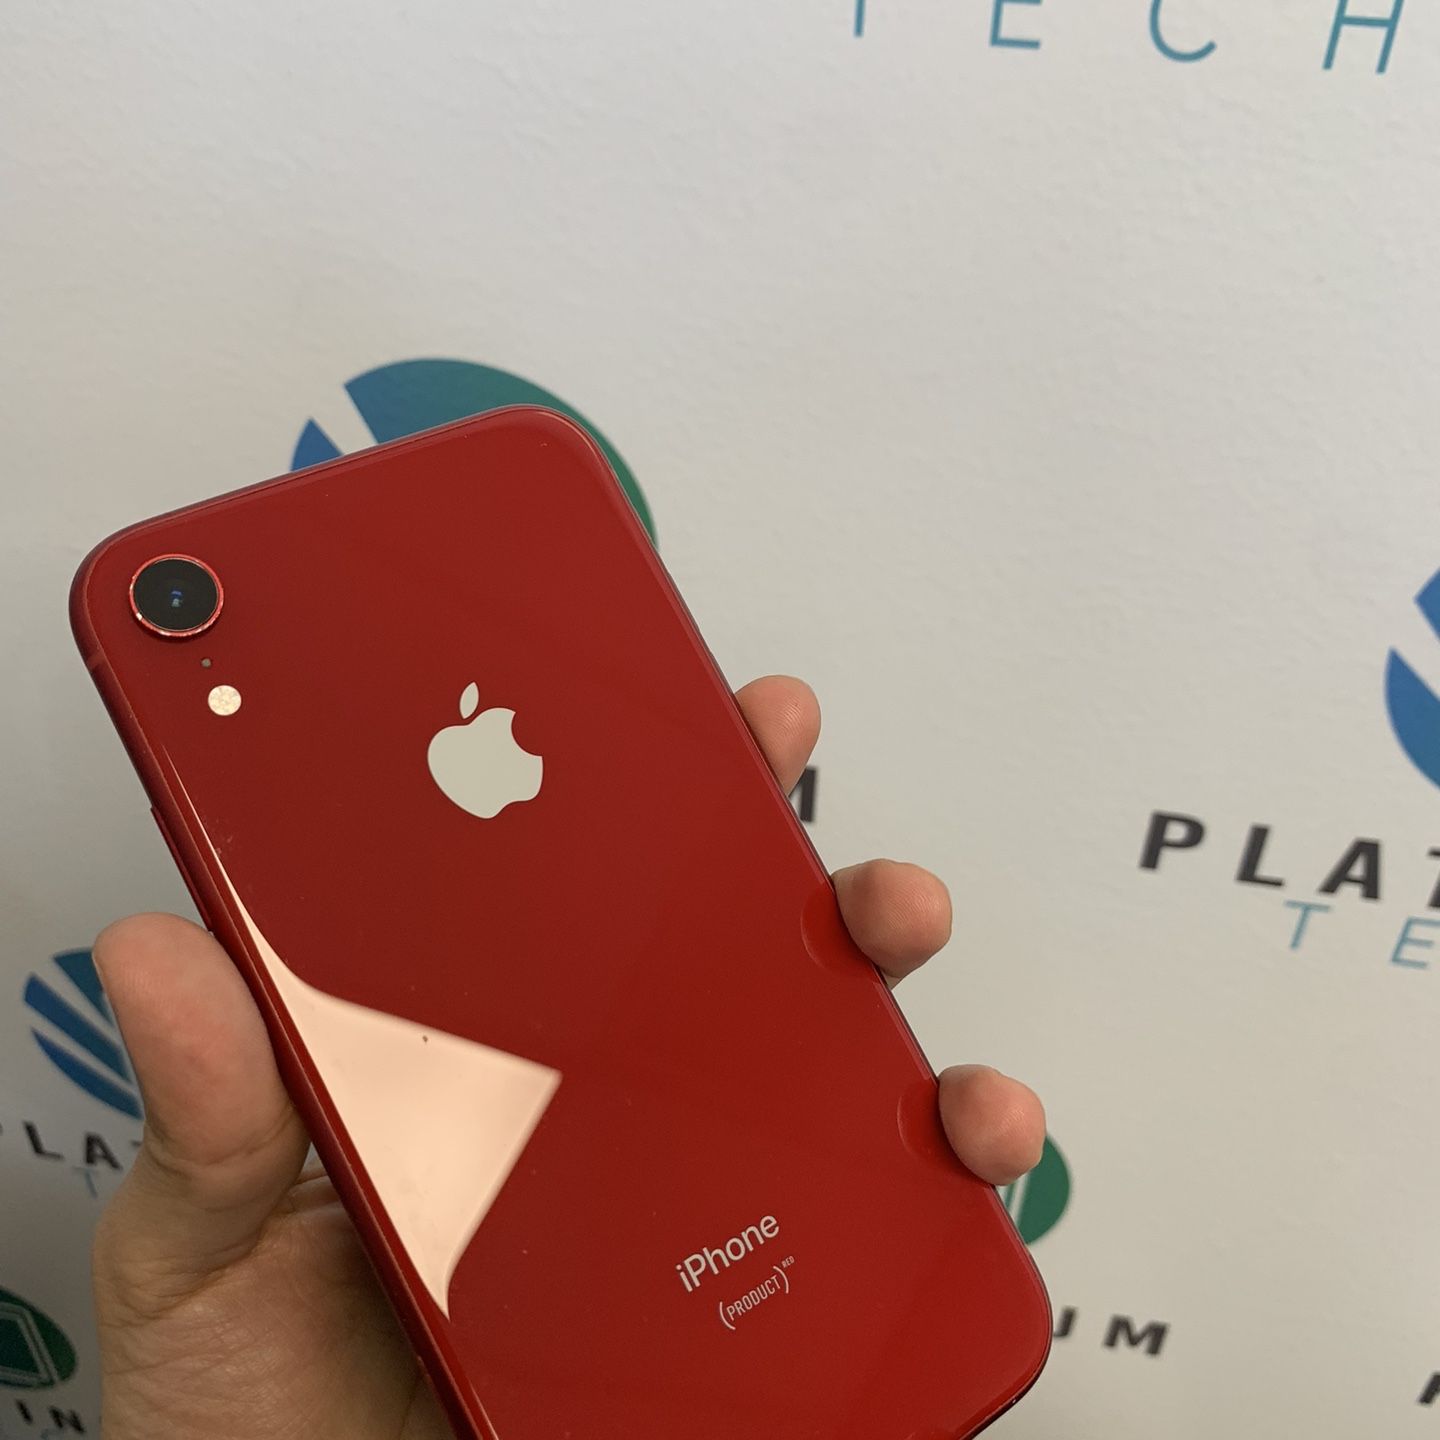 ❤️📱 iPhone XR 64 GB Unlocked BH81% 🔋 Case And Headphones For Free 💯❤️